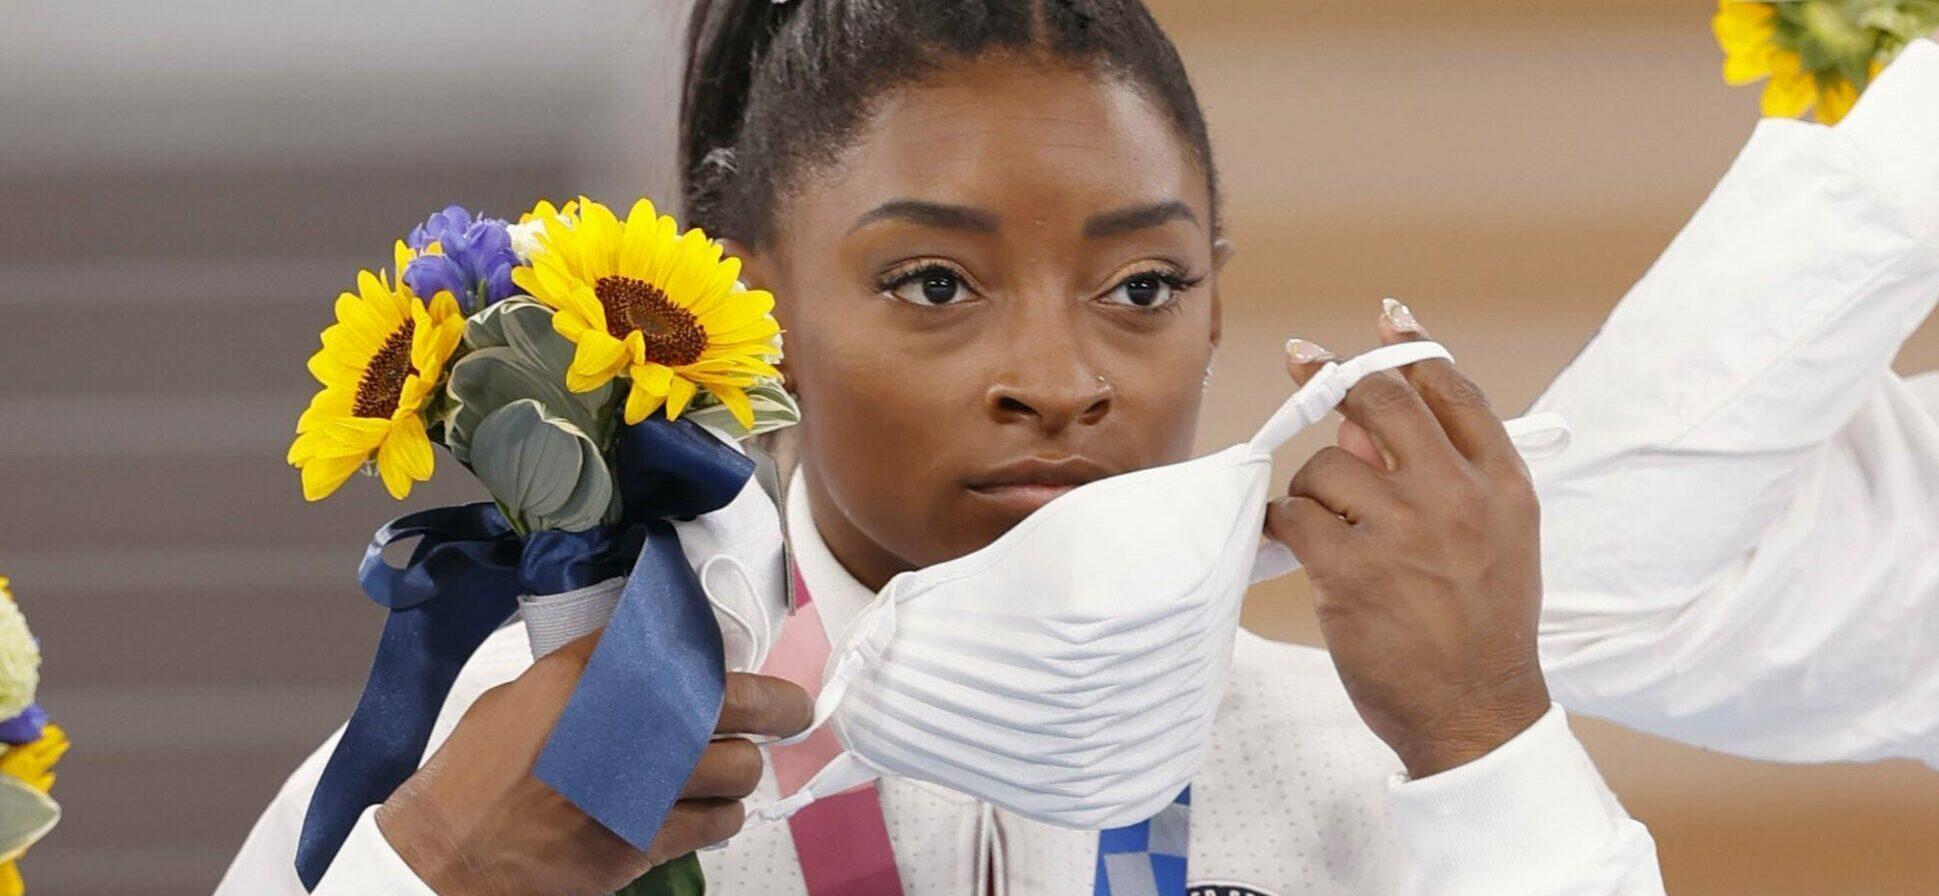 Simone Biles of the United States puts on a mask for protection against the coronavirus after photo shoots during the medal ceremony of the Tokyo Olympic women's artistic gymnastics team competition on July 27, 2021, at Ariake Gymnastics Centre. The United States took silver. (Kyodo)==Kyodo Newscom/(Mega Agency TagID: kyodowc295990.jpg) [Photo via Mega Agency]